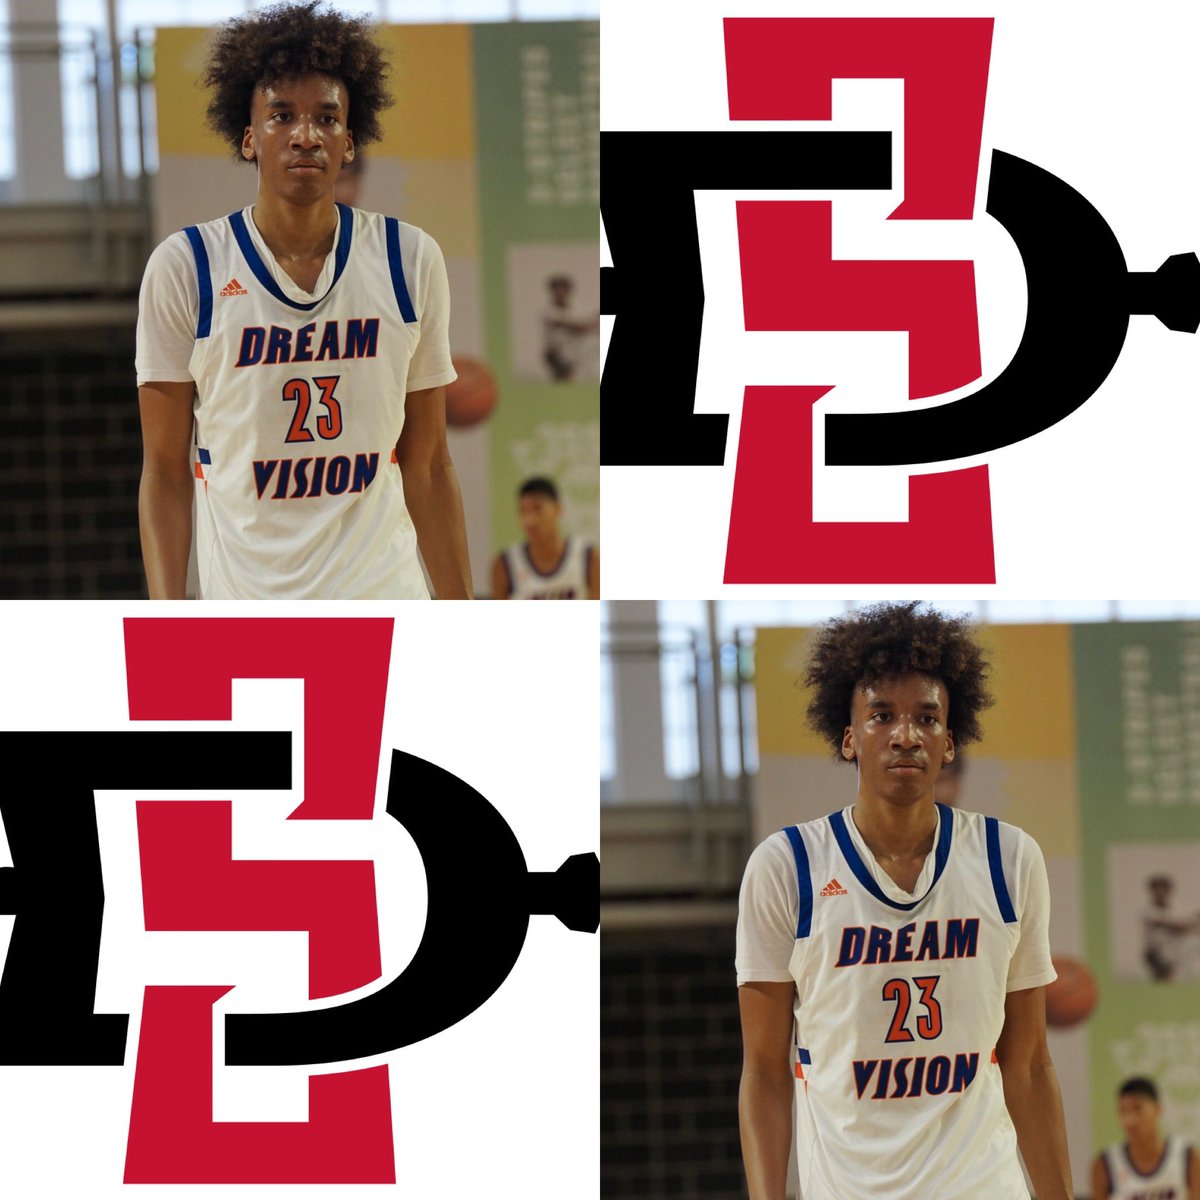 Congrats to DV G/F Tyler Harris on receiving an offer from San Diego State University! #adidas #3SSB #DVFAM